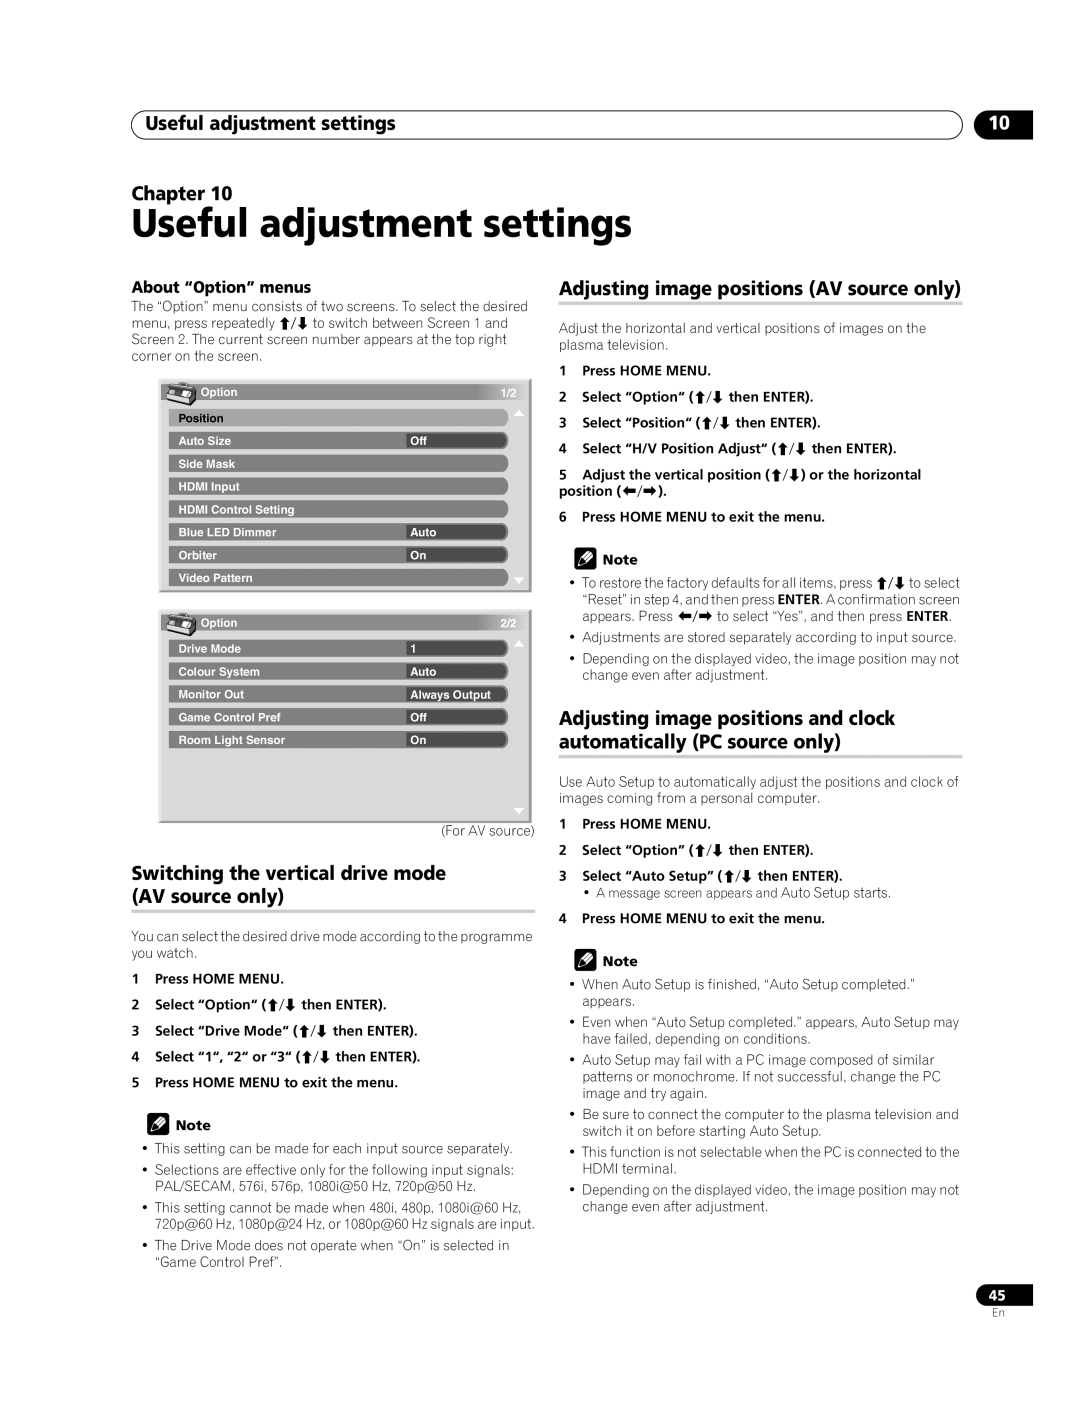 Pioneer PDP-508XDA Useful adjustment settings, Switching the vertical drive mode AV source only, About “Option” menus 